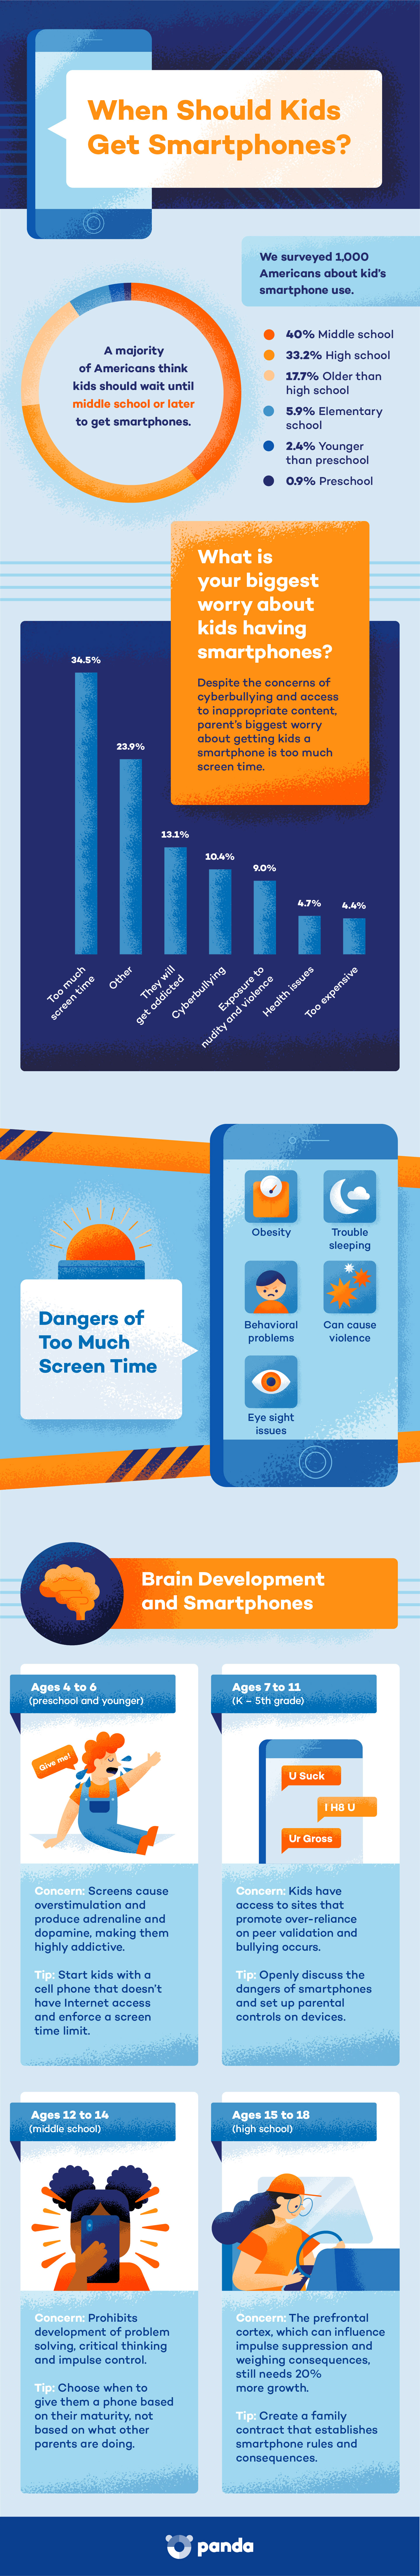 Infographic about when kids should get smartphones